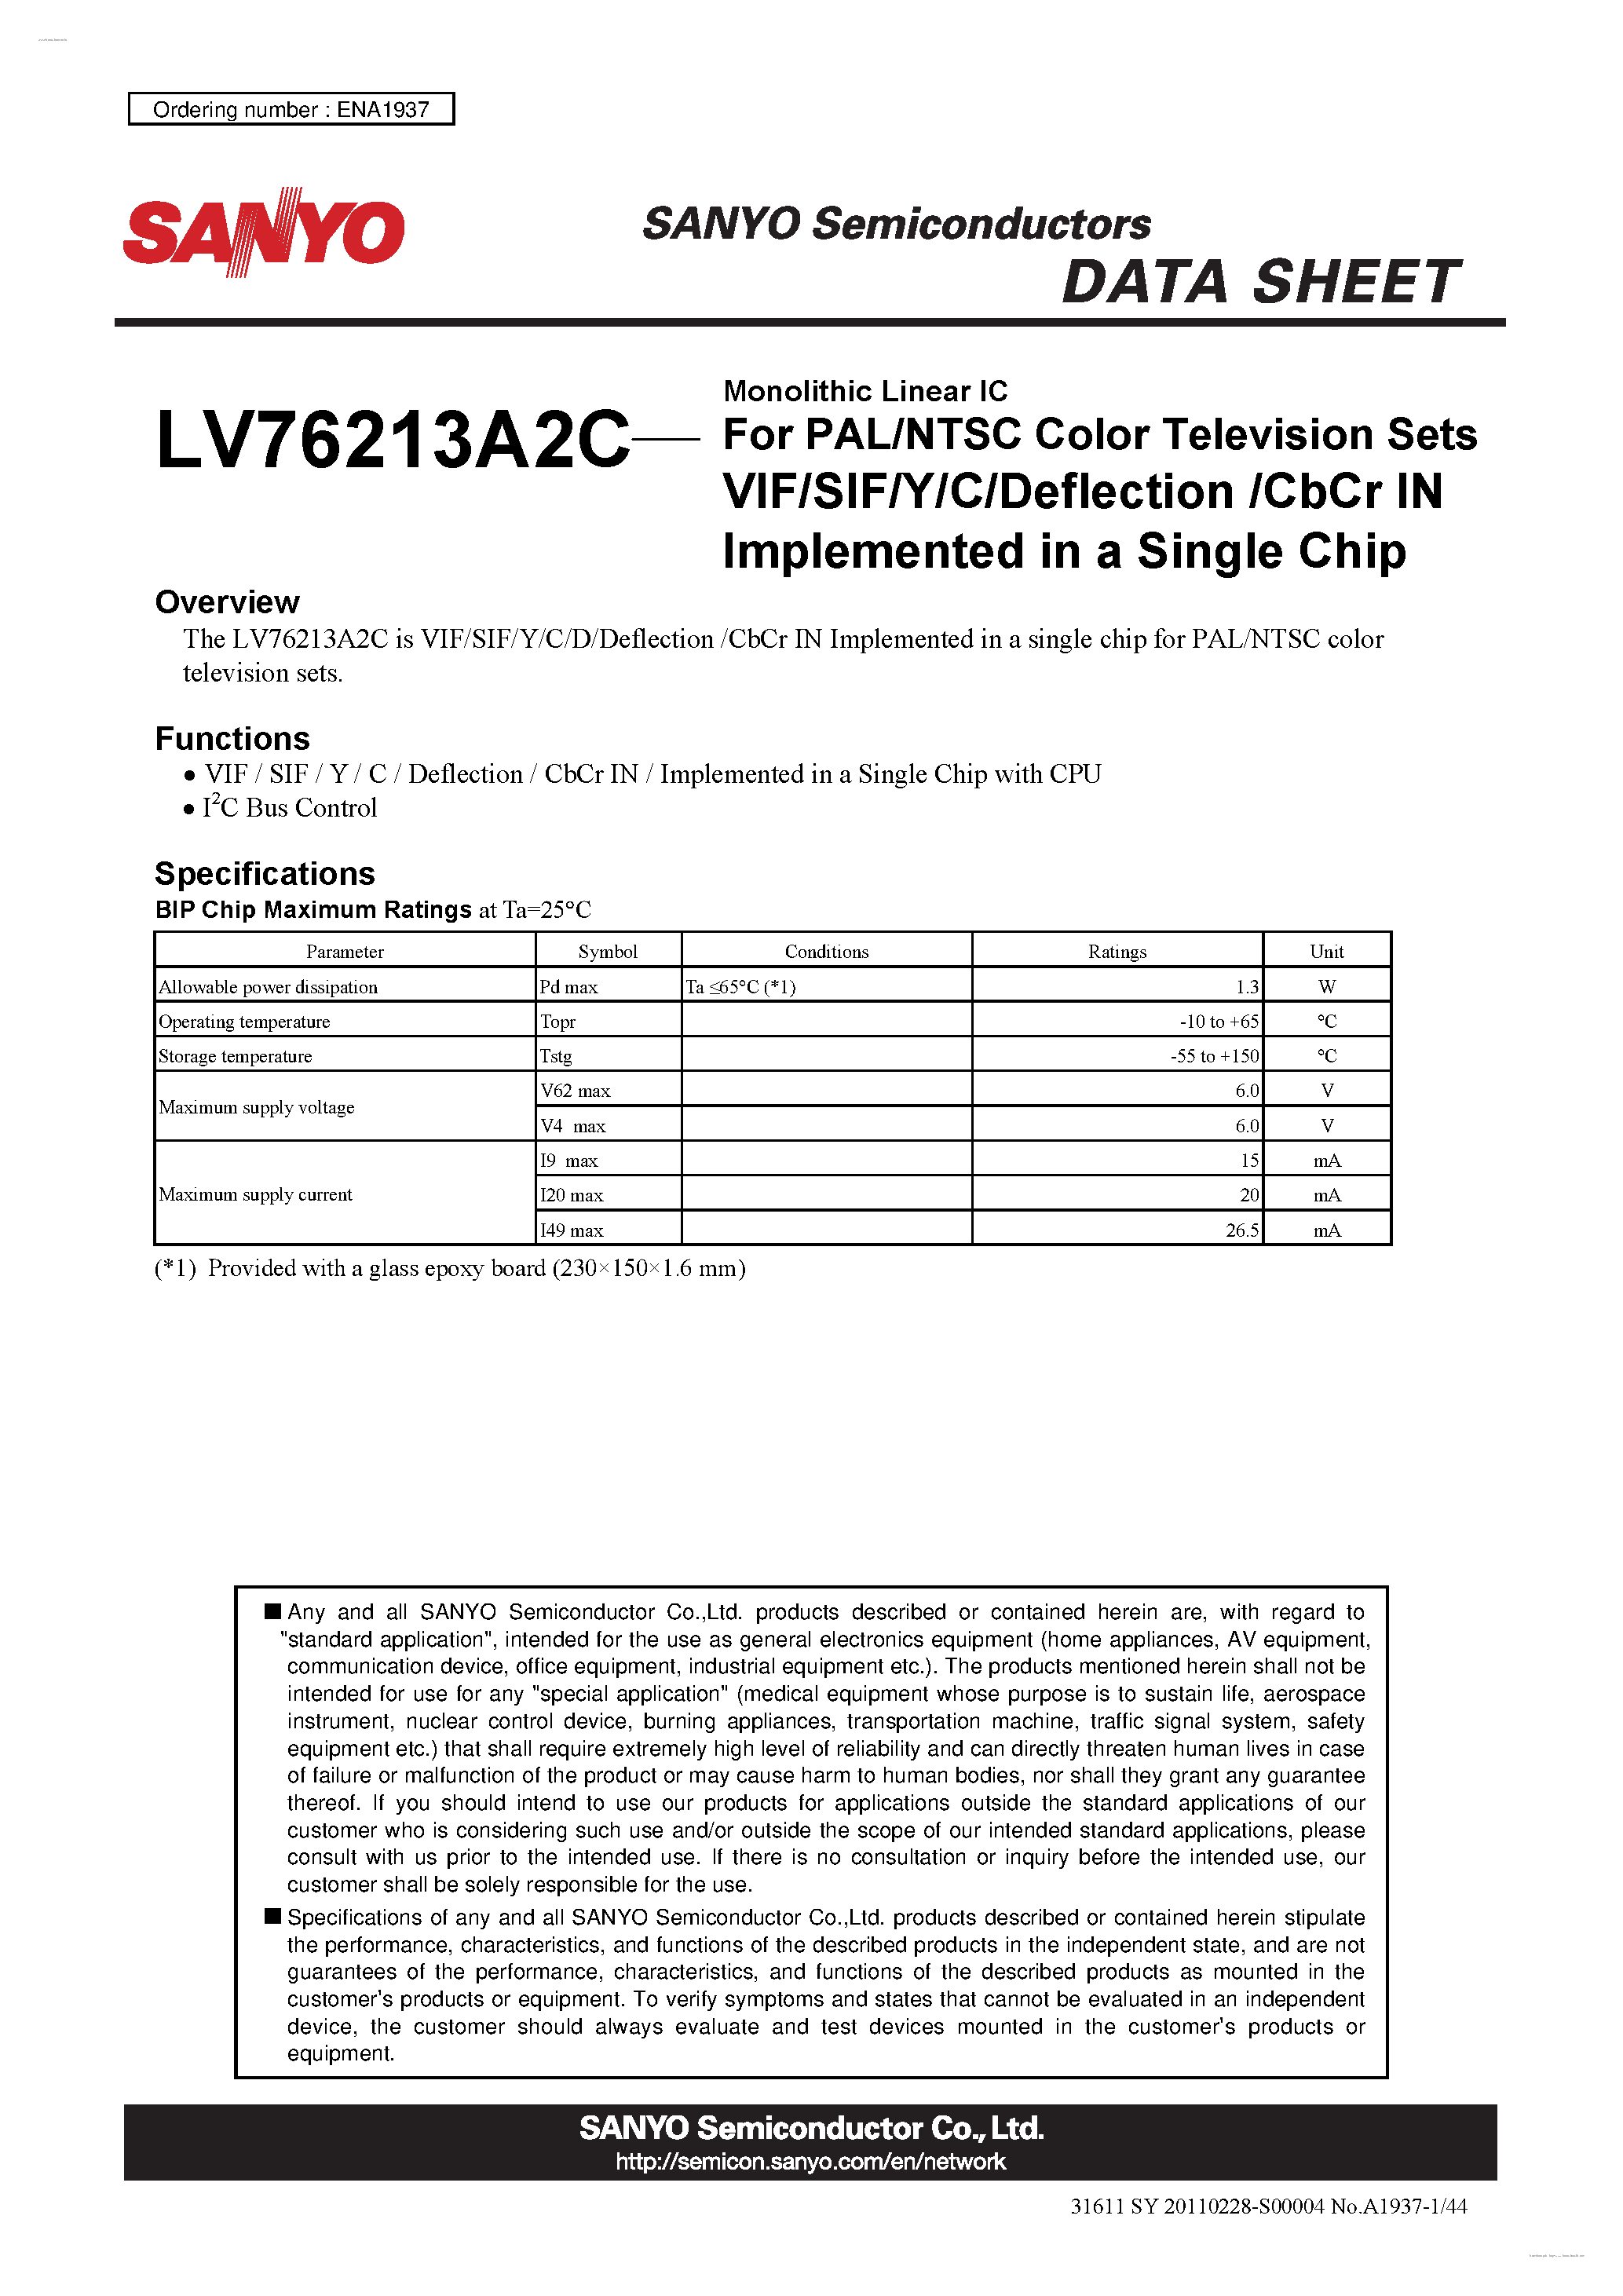 Datasheet LV76213A2C - VIF/SIF/Y/C/Deflection /CbCr IN Implemented in a Single Chip page 1